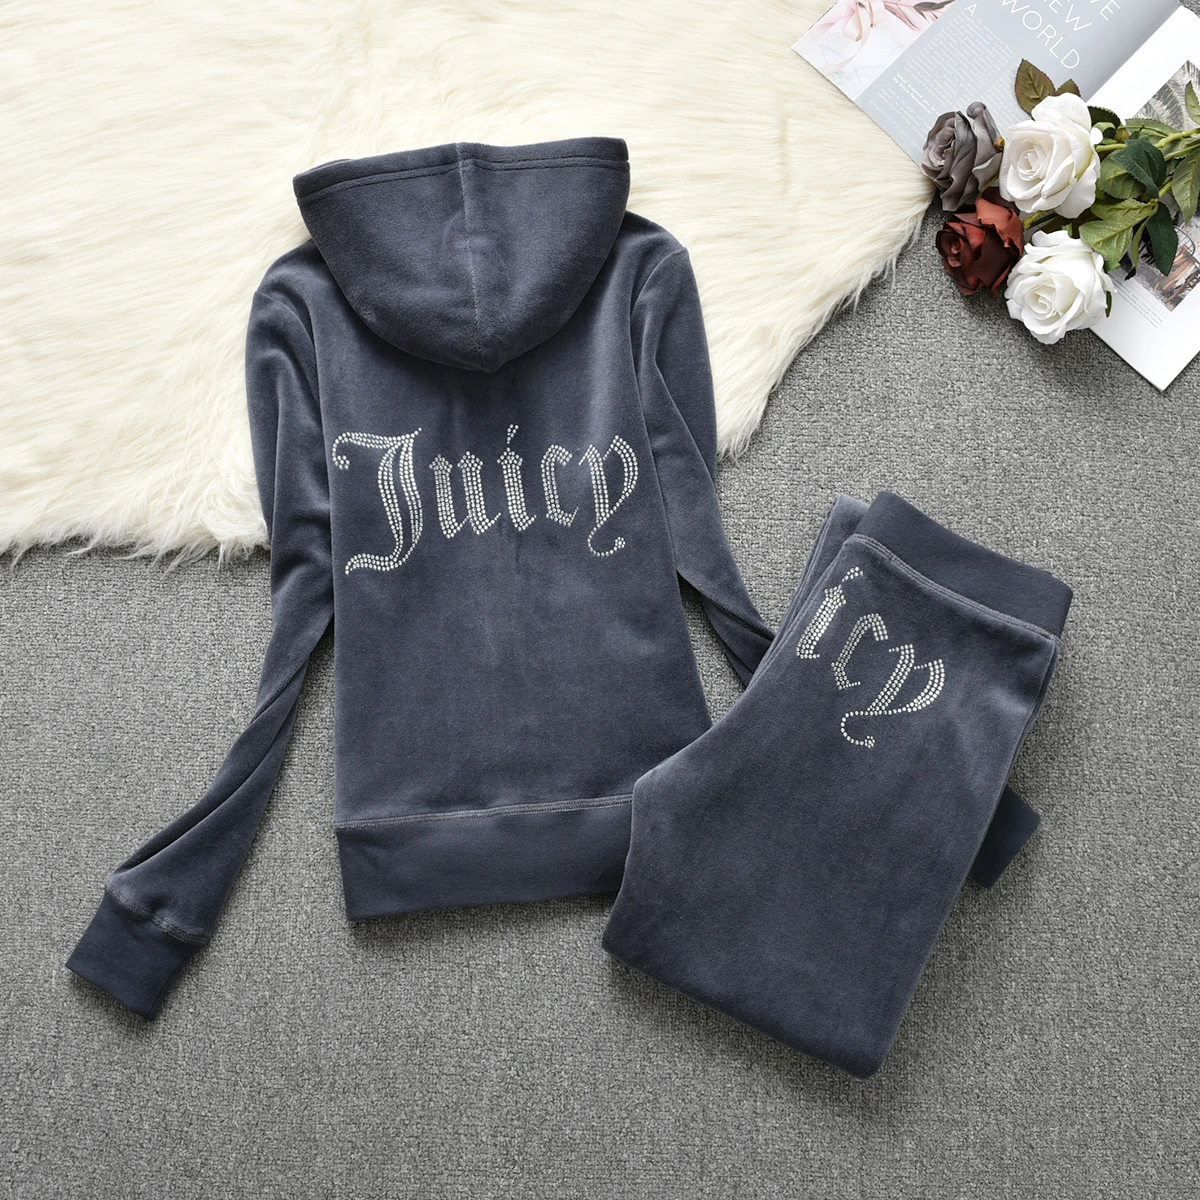 Women's Velvet Juicy Coutoure Tracksuit Tight Fitting Sweatshirt and Pants Brand Fabric Tracksuit Velour Hoodies Juicy Tracksuit blazer and trouser set Suits & Blazers